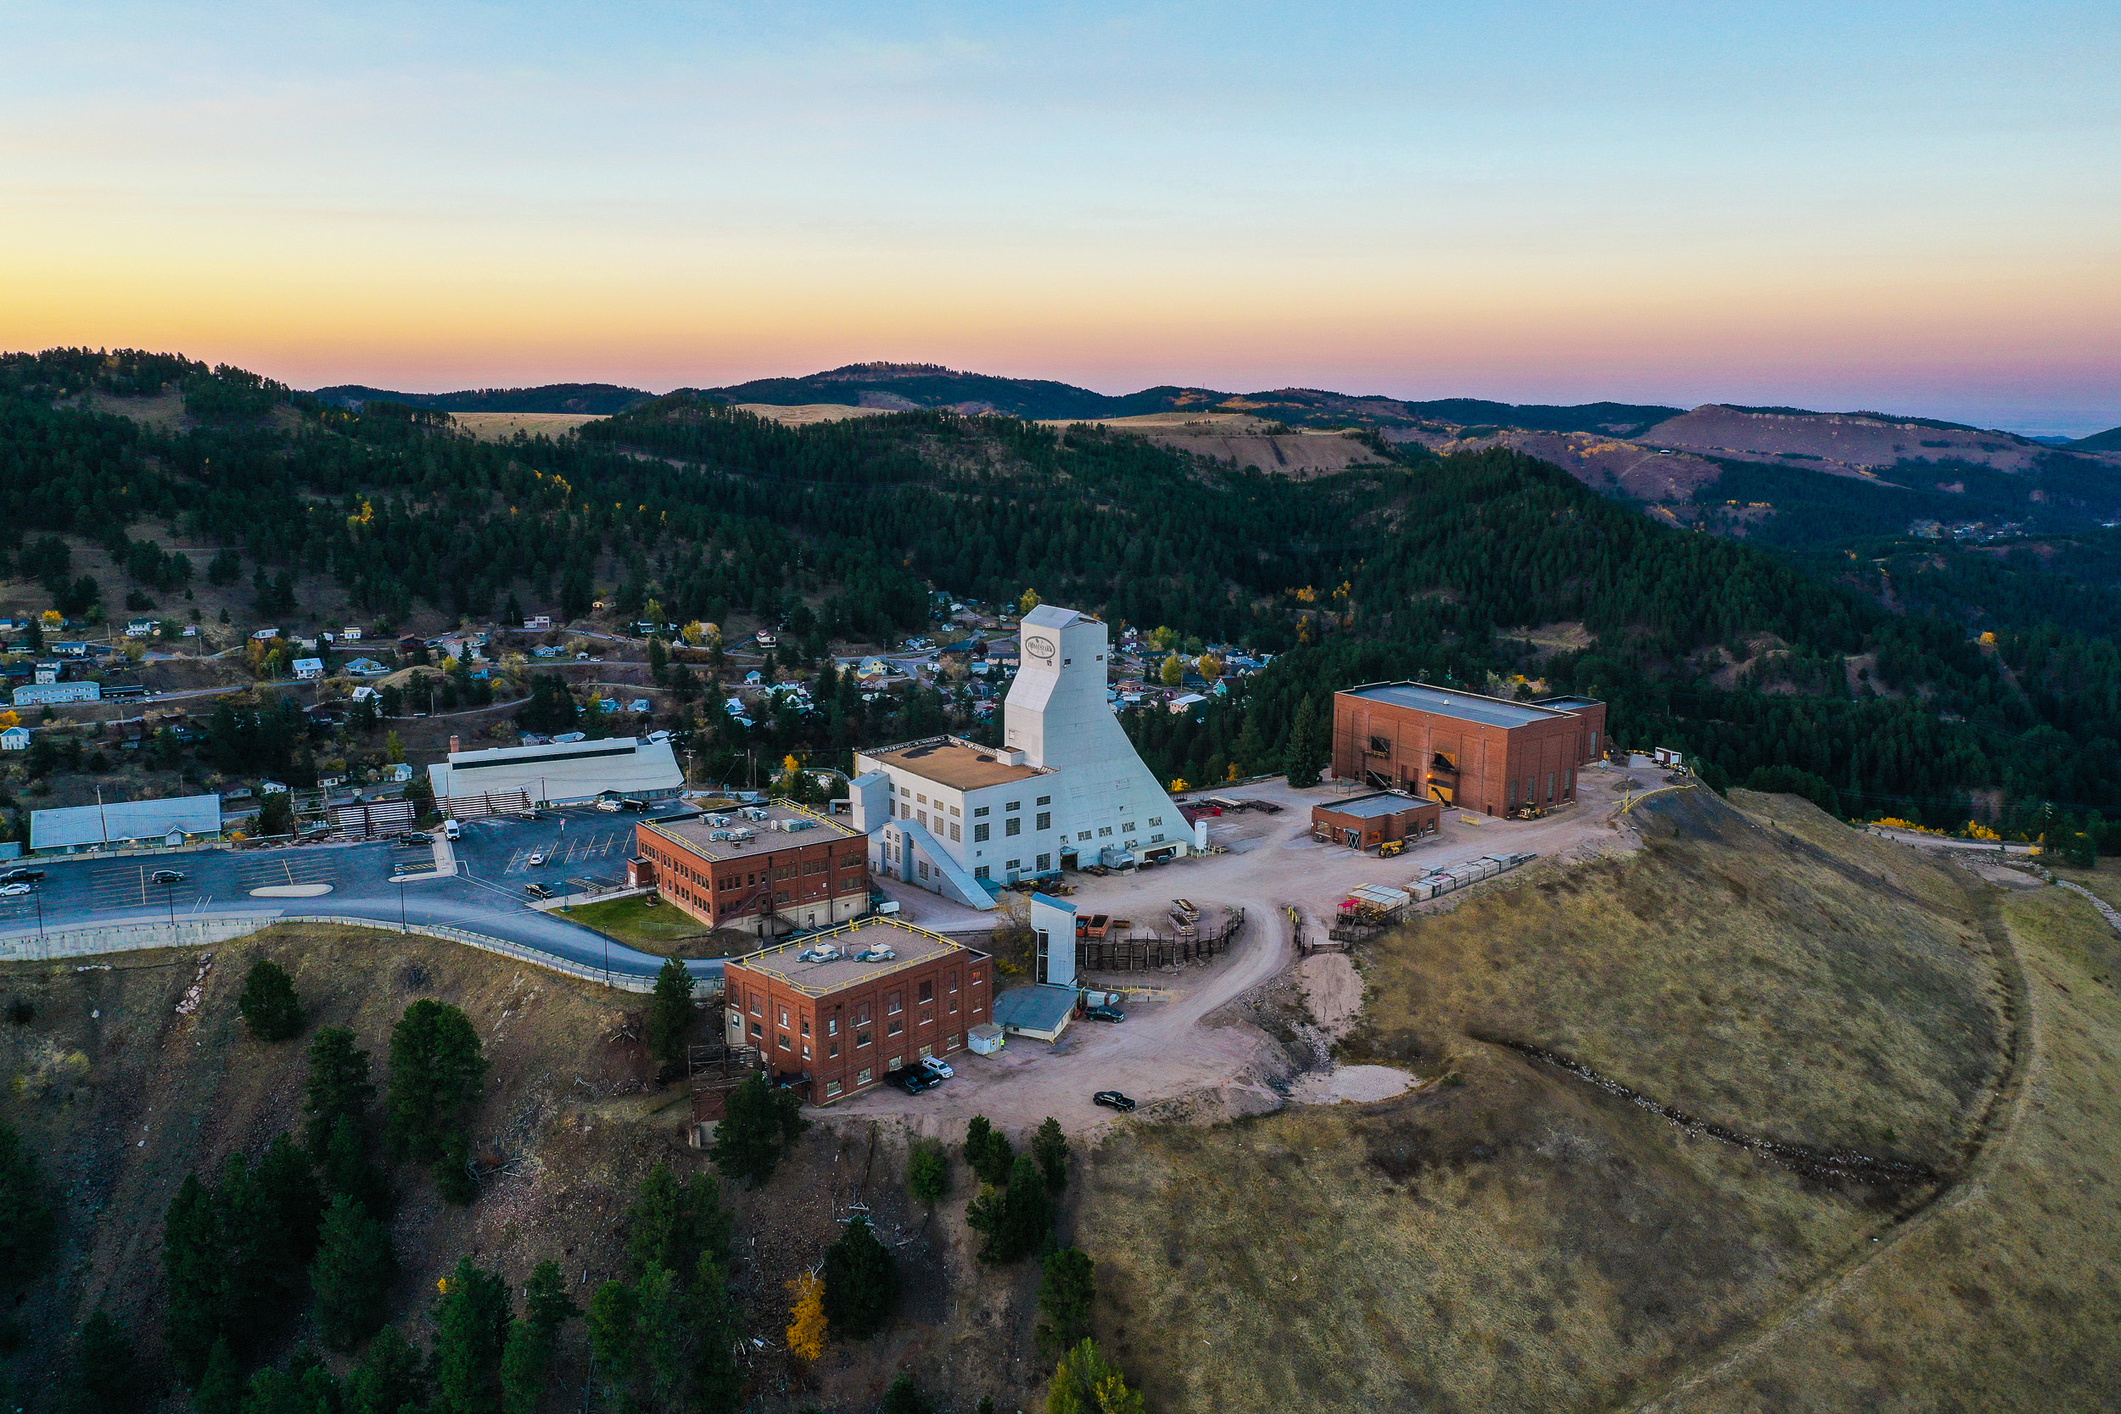 Birds' eye view of Sanford Underground Research Facility at sunset